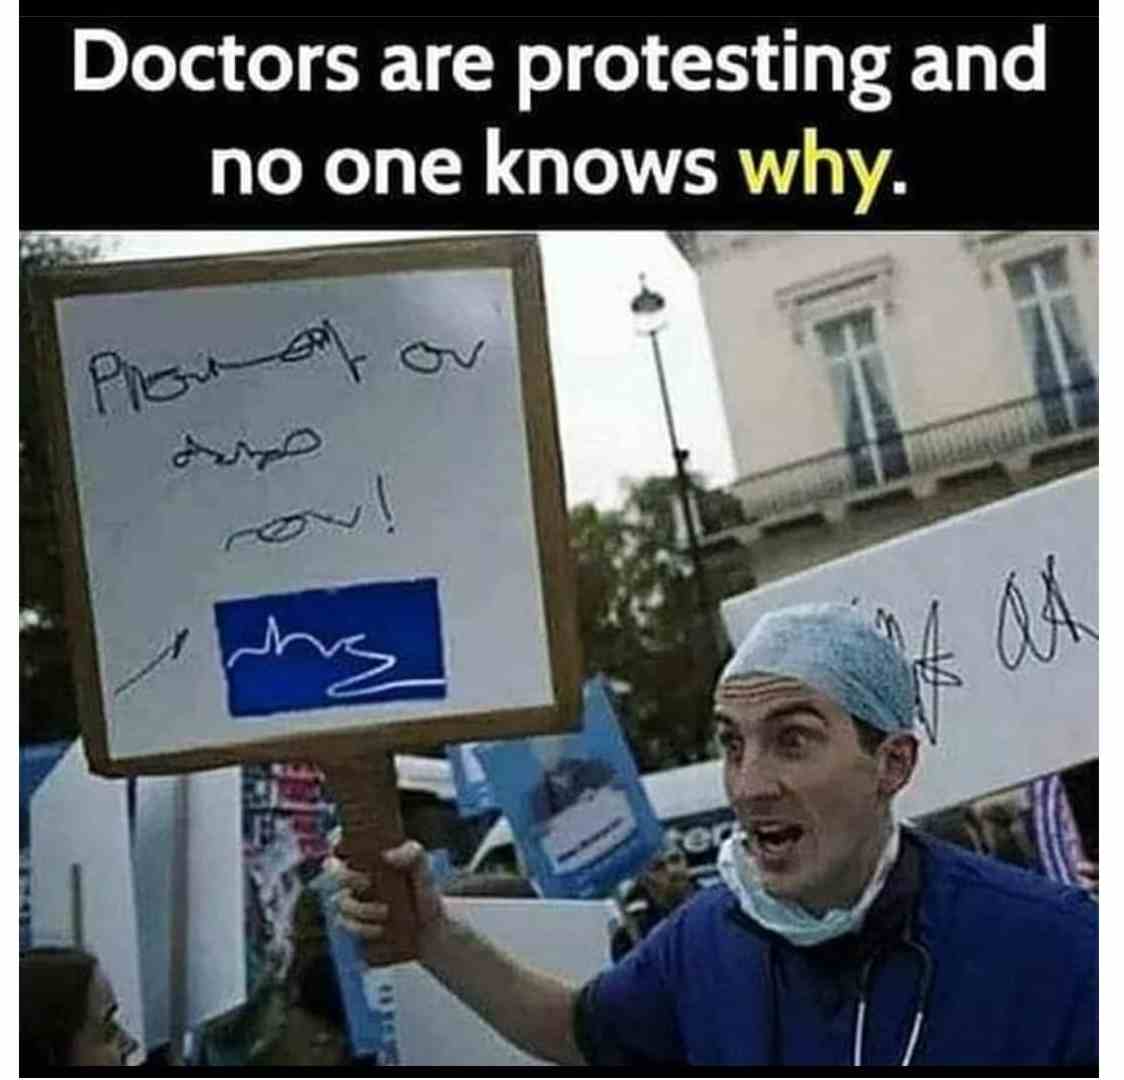 Doctors are Protesting and no one knows why